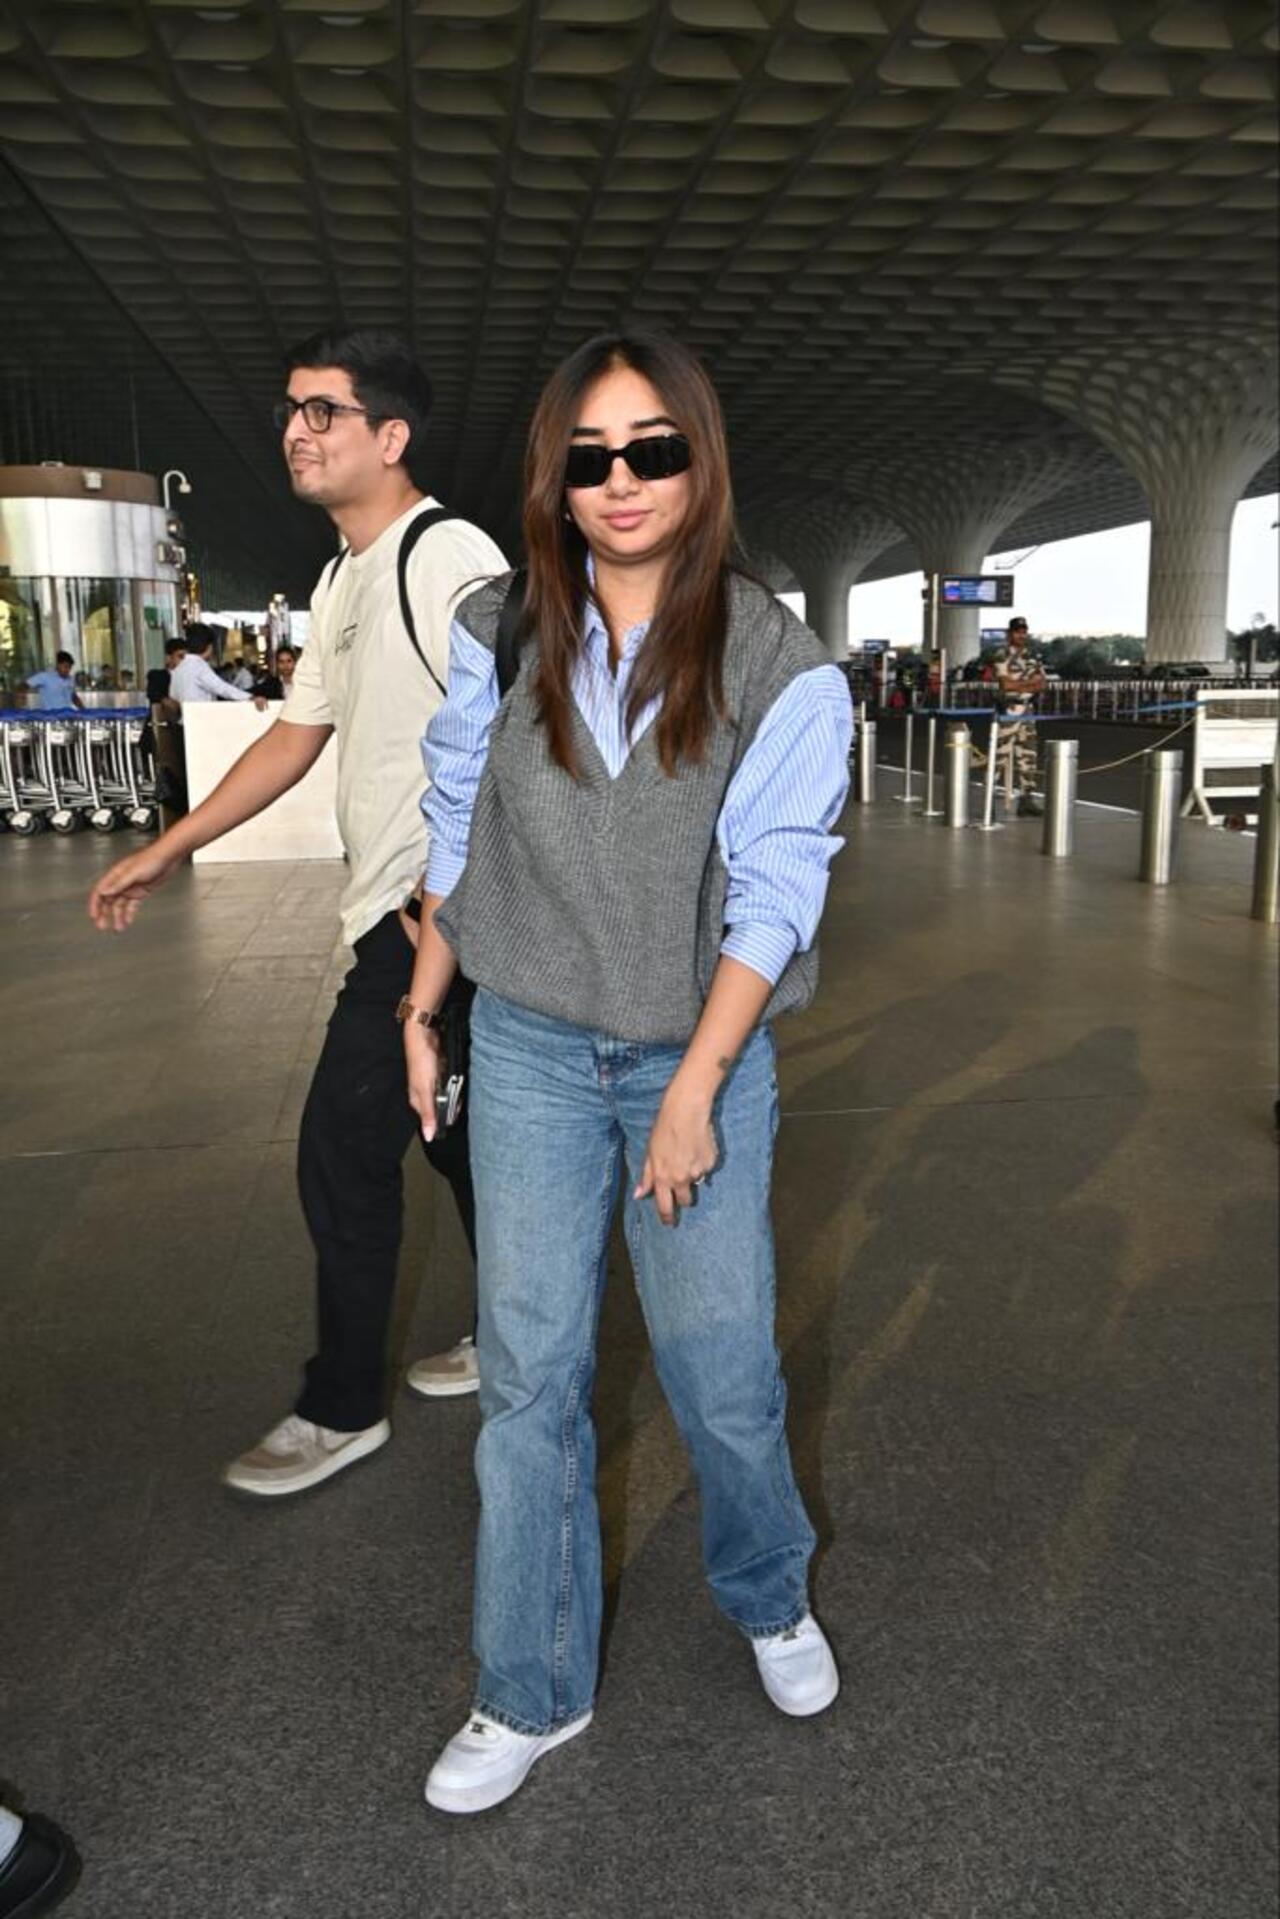 Prajakta Koli and her beau were seen at the airport today